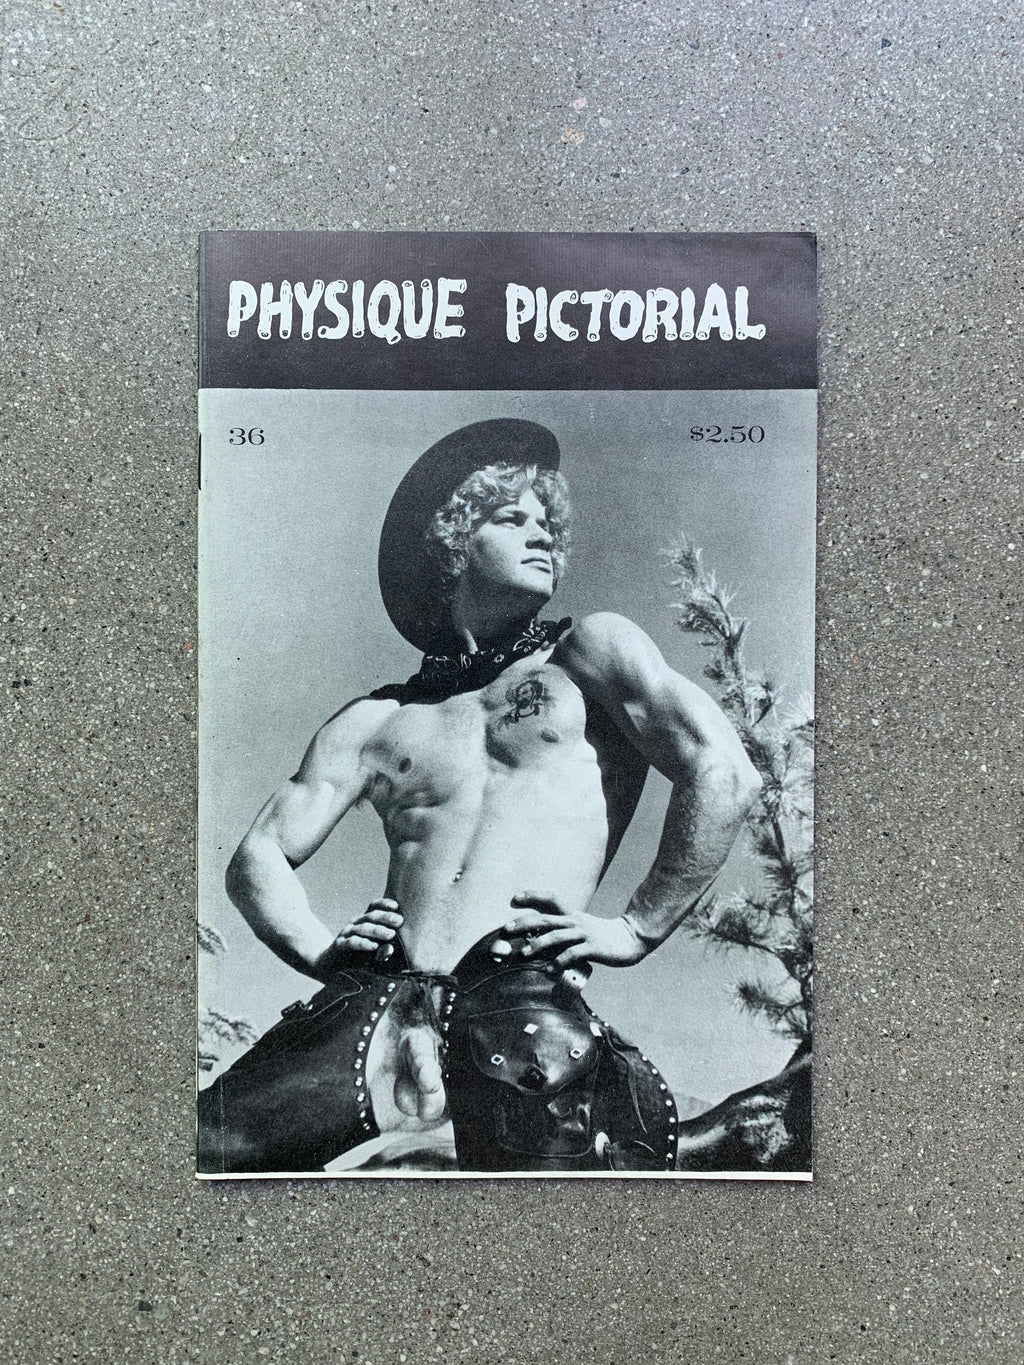 Vintage Physique Pictorial - Volume 36 Issue 1